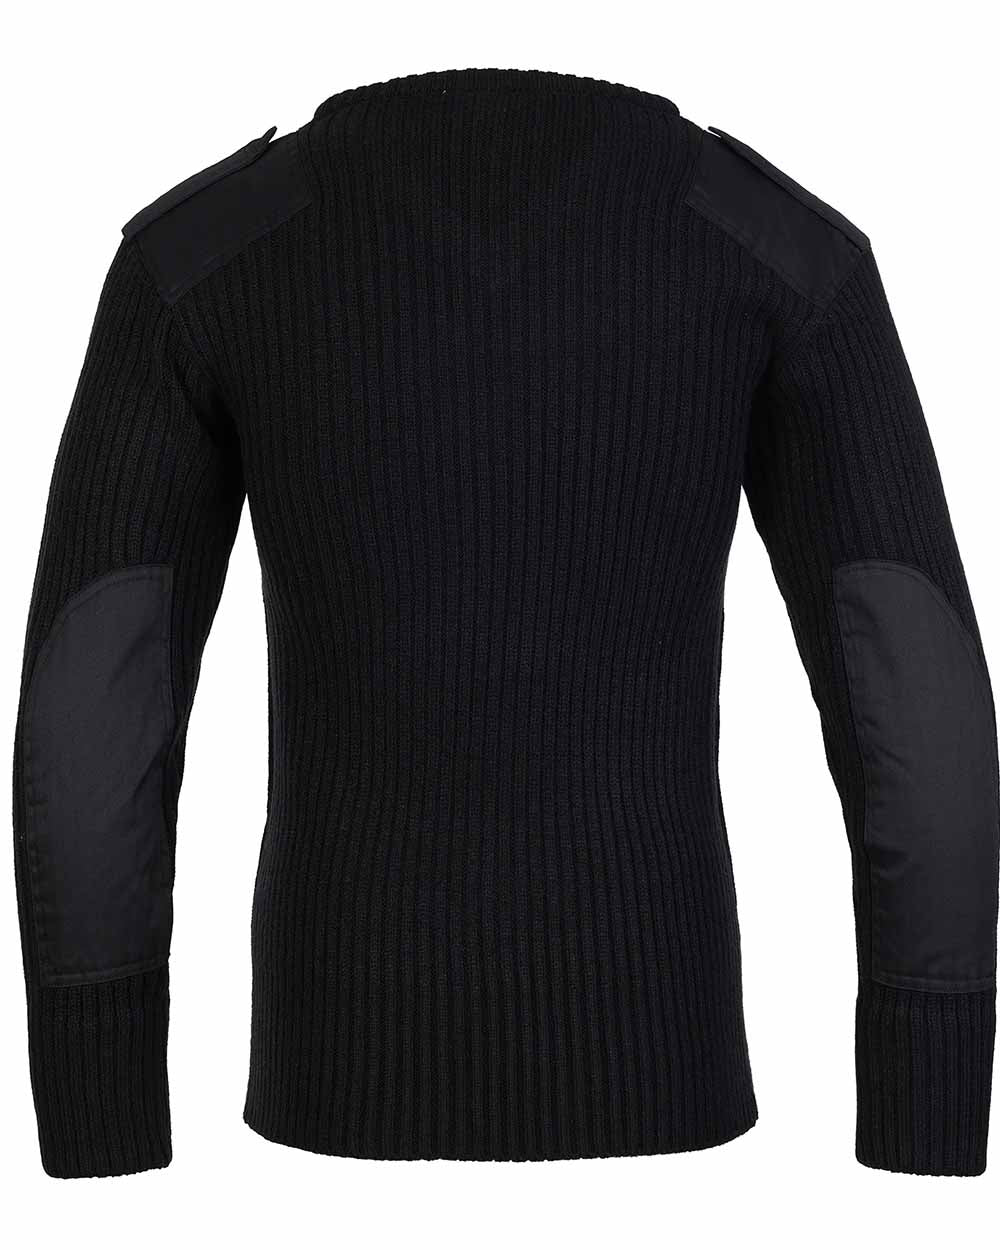 Elbow patches Vee Neck Military Style Jumper by Fort 